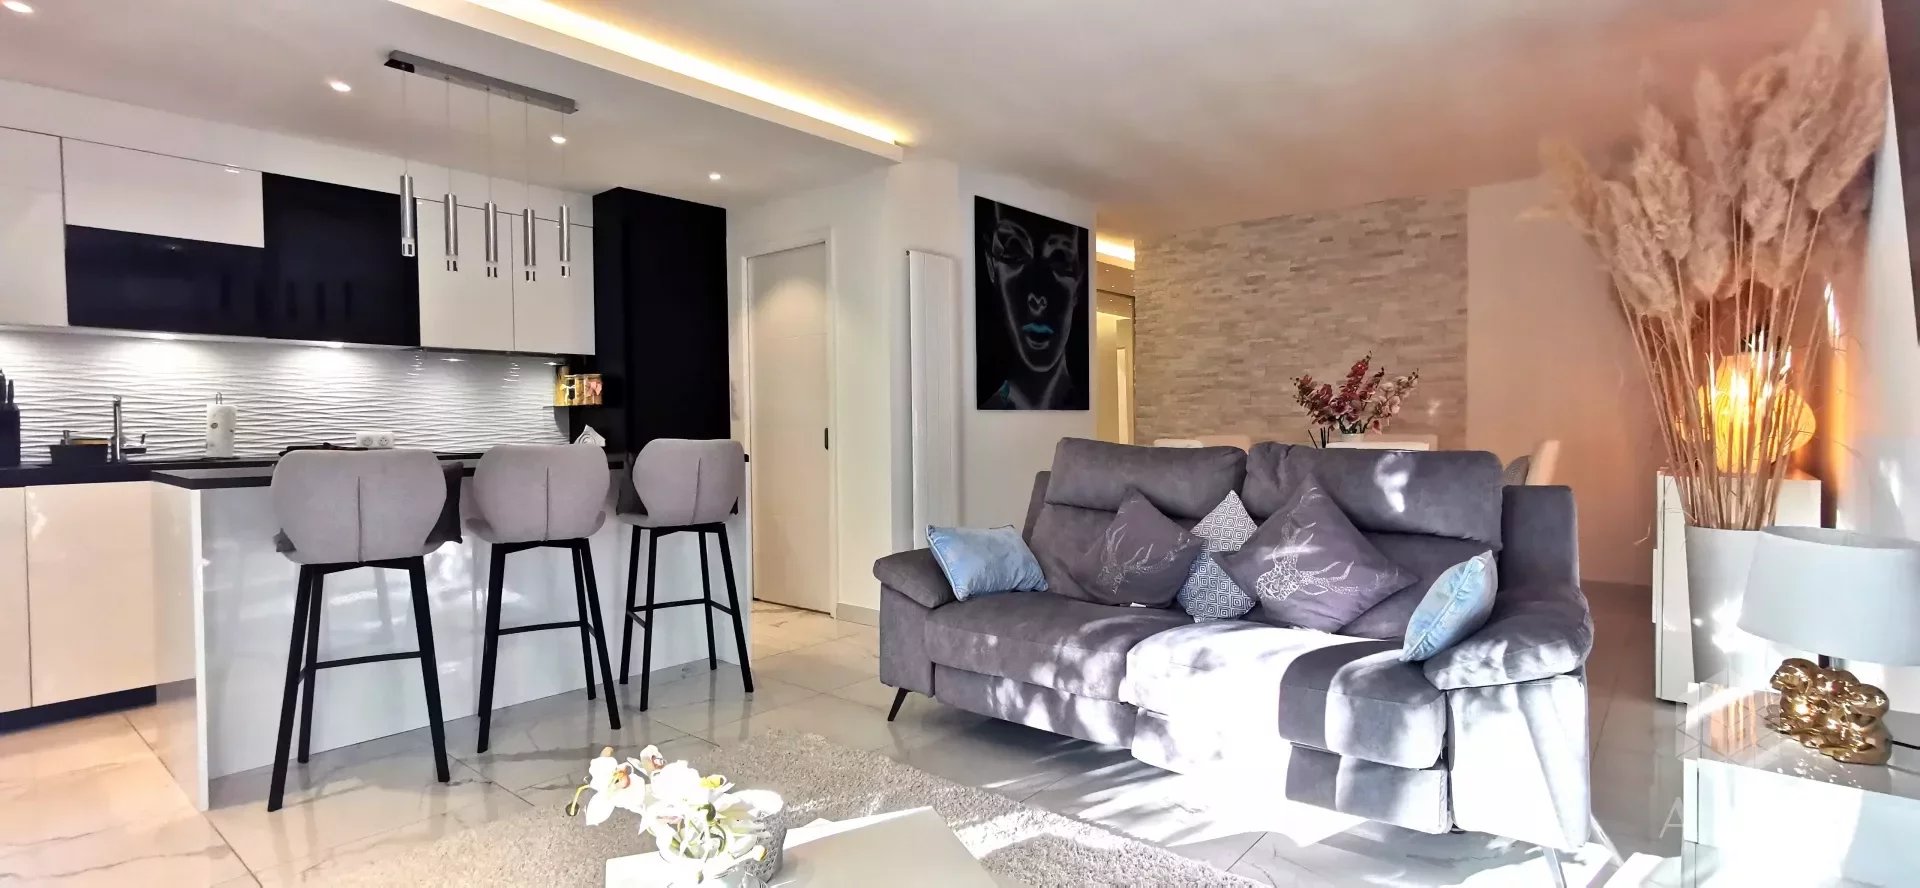 Luxurious Apartment with Double Garage at Château Saint Anne, Nice - 400m from the Sea